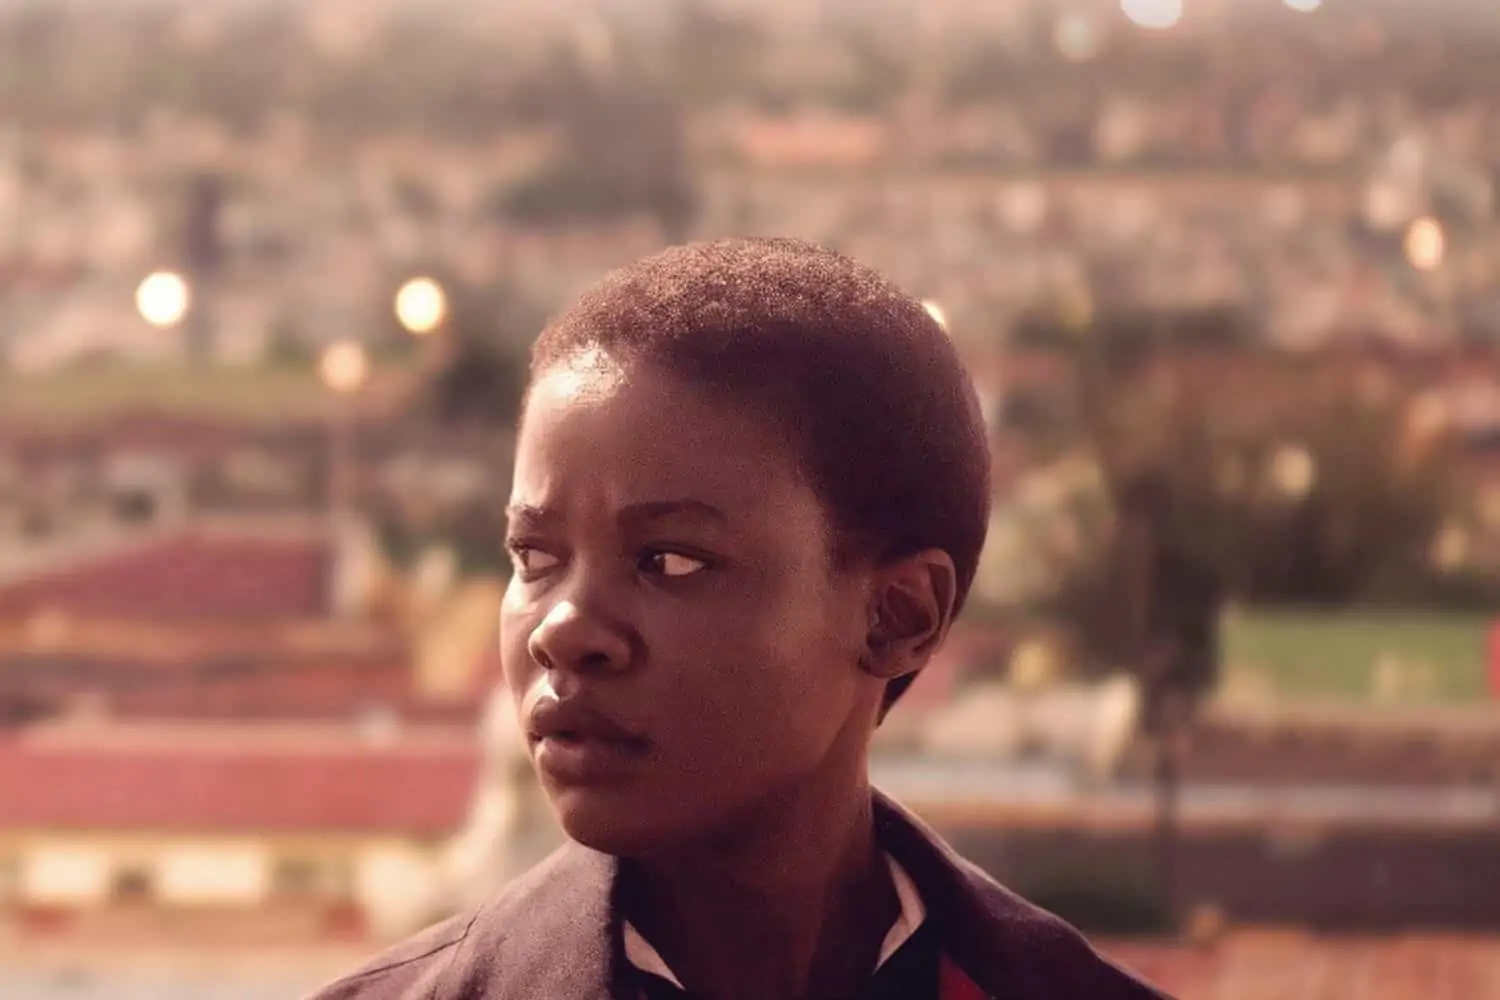 South African short film "When the Sun Sets" up for an Oscar